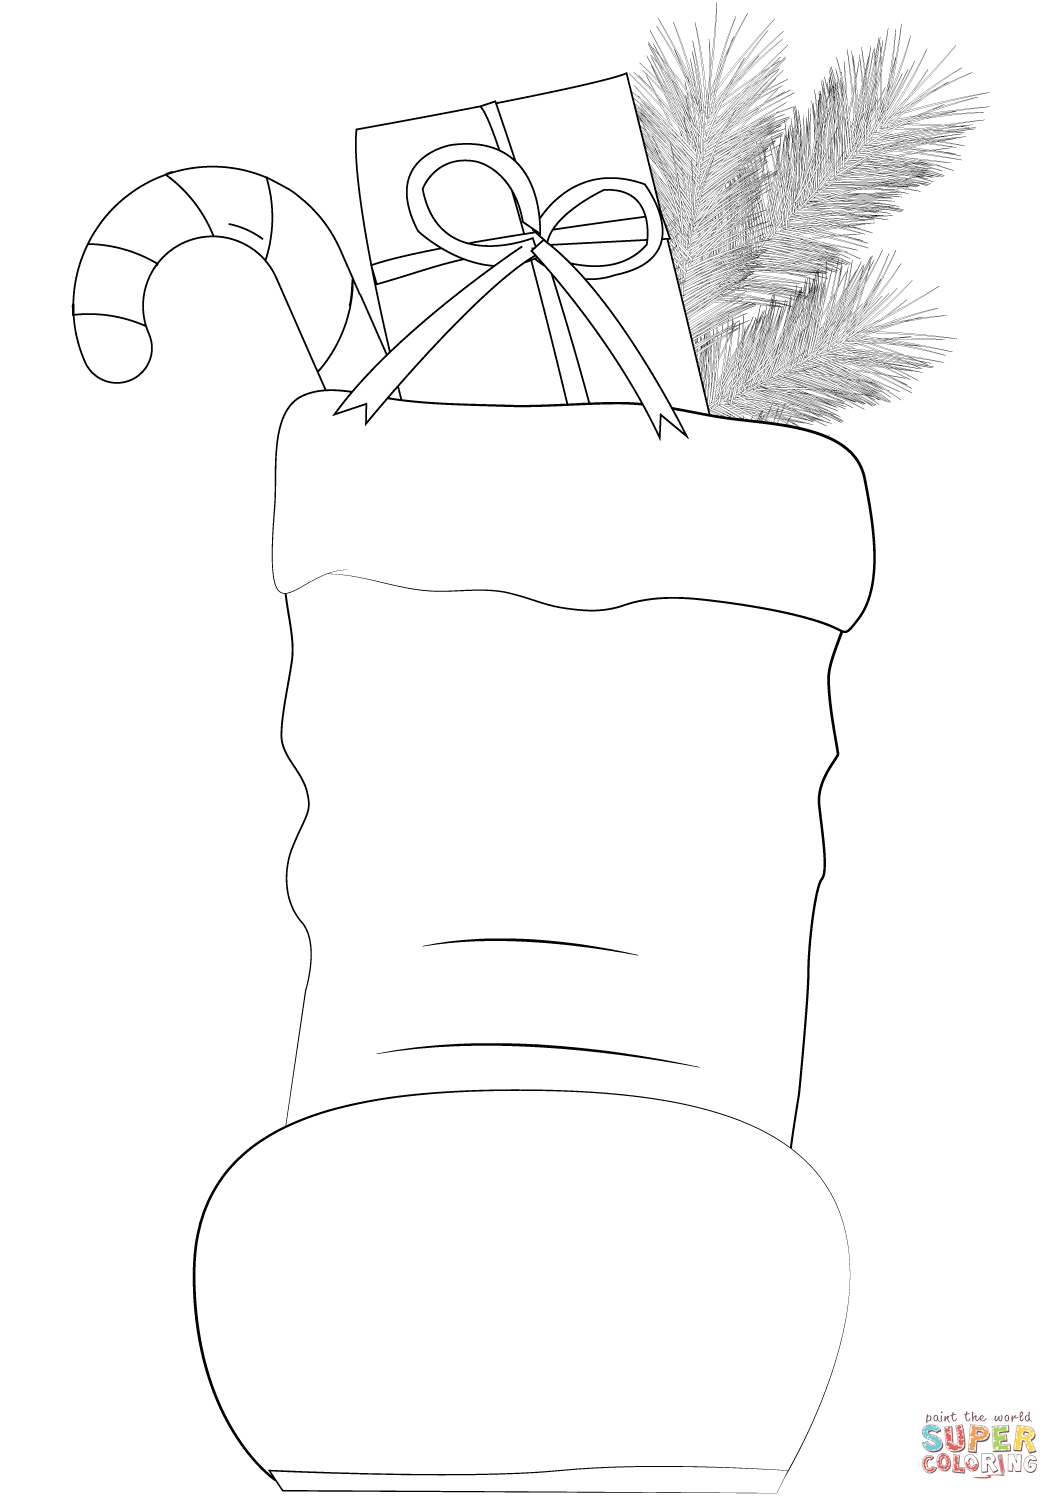 Santa claus boots coloring page free printable coloring pages